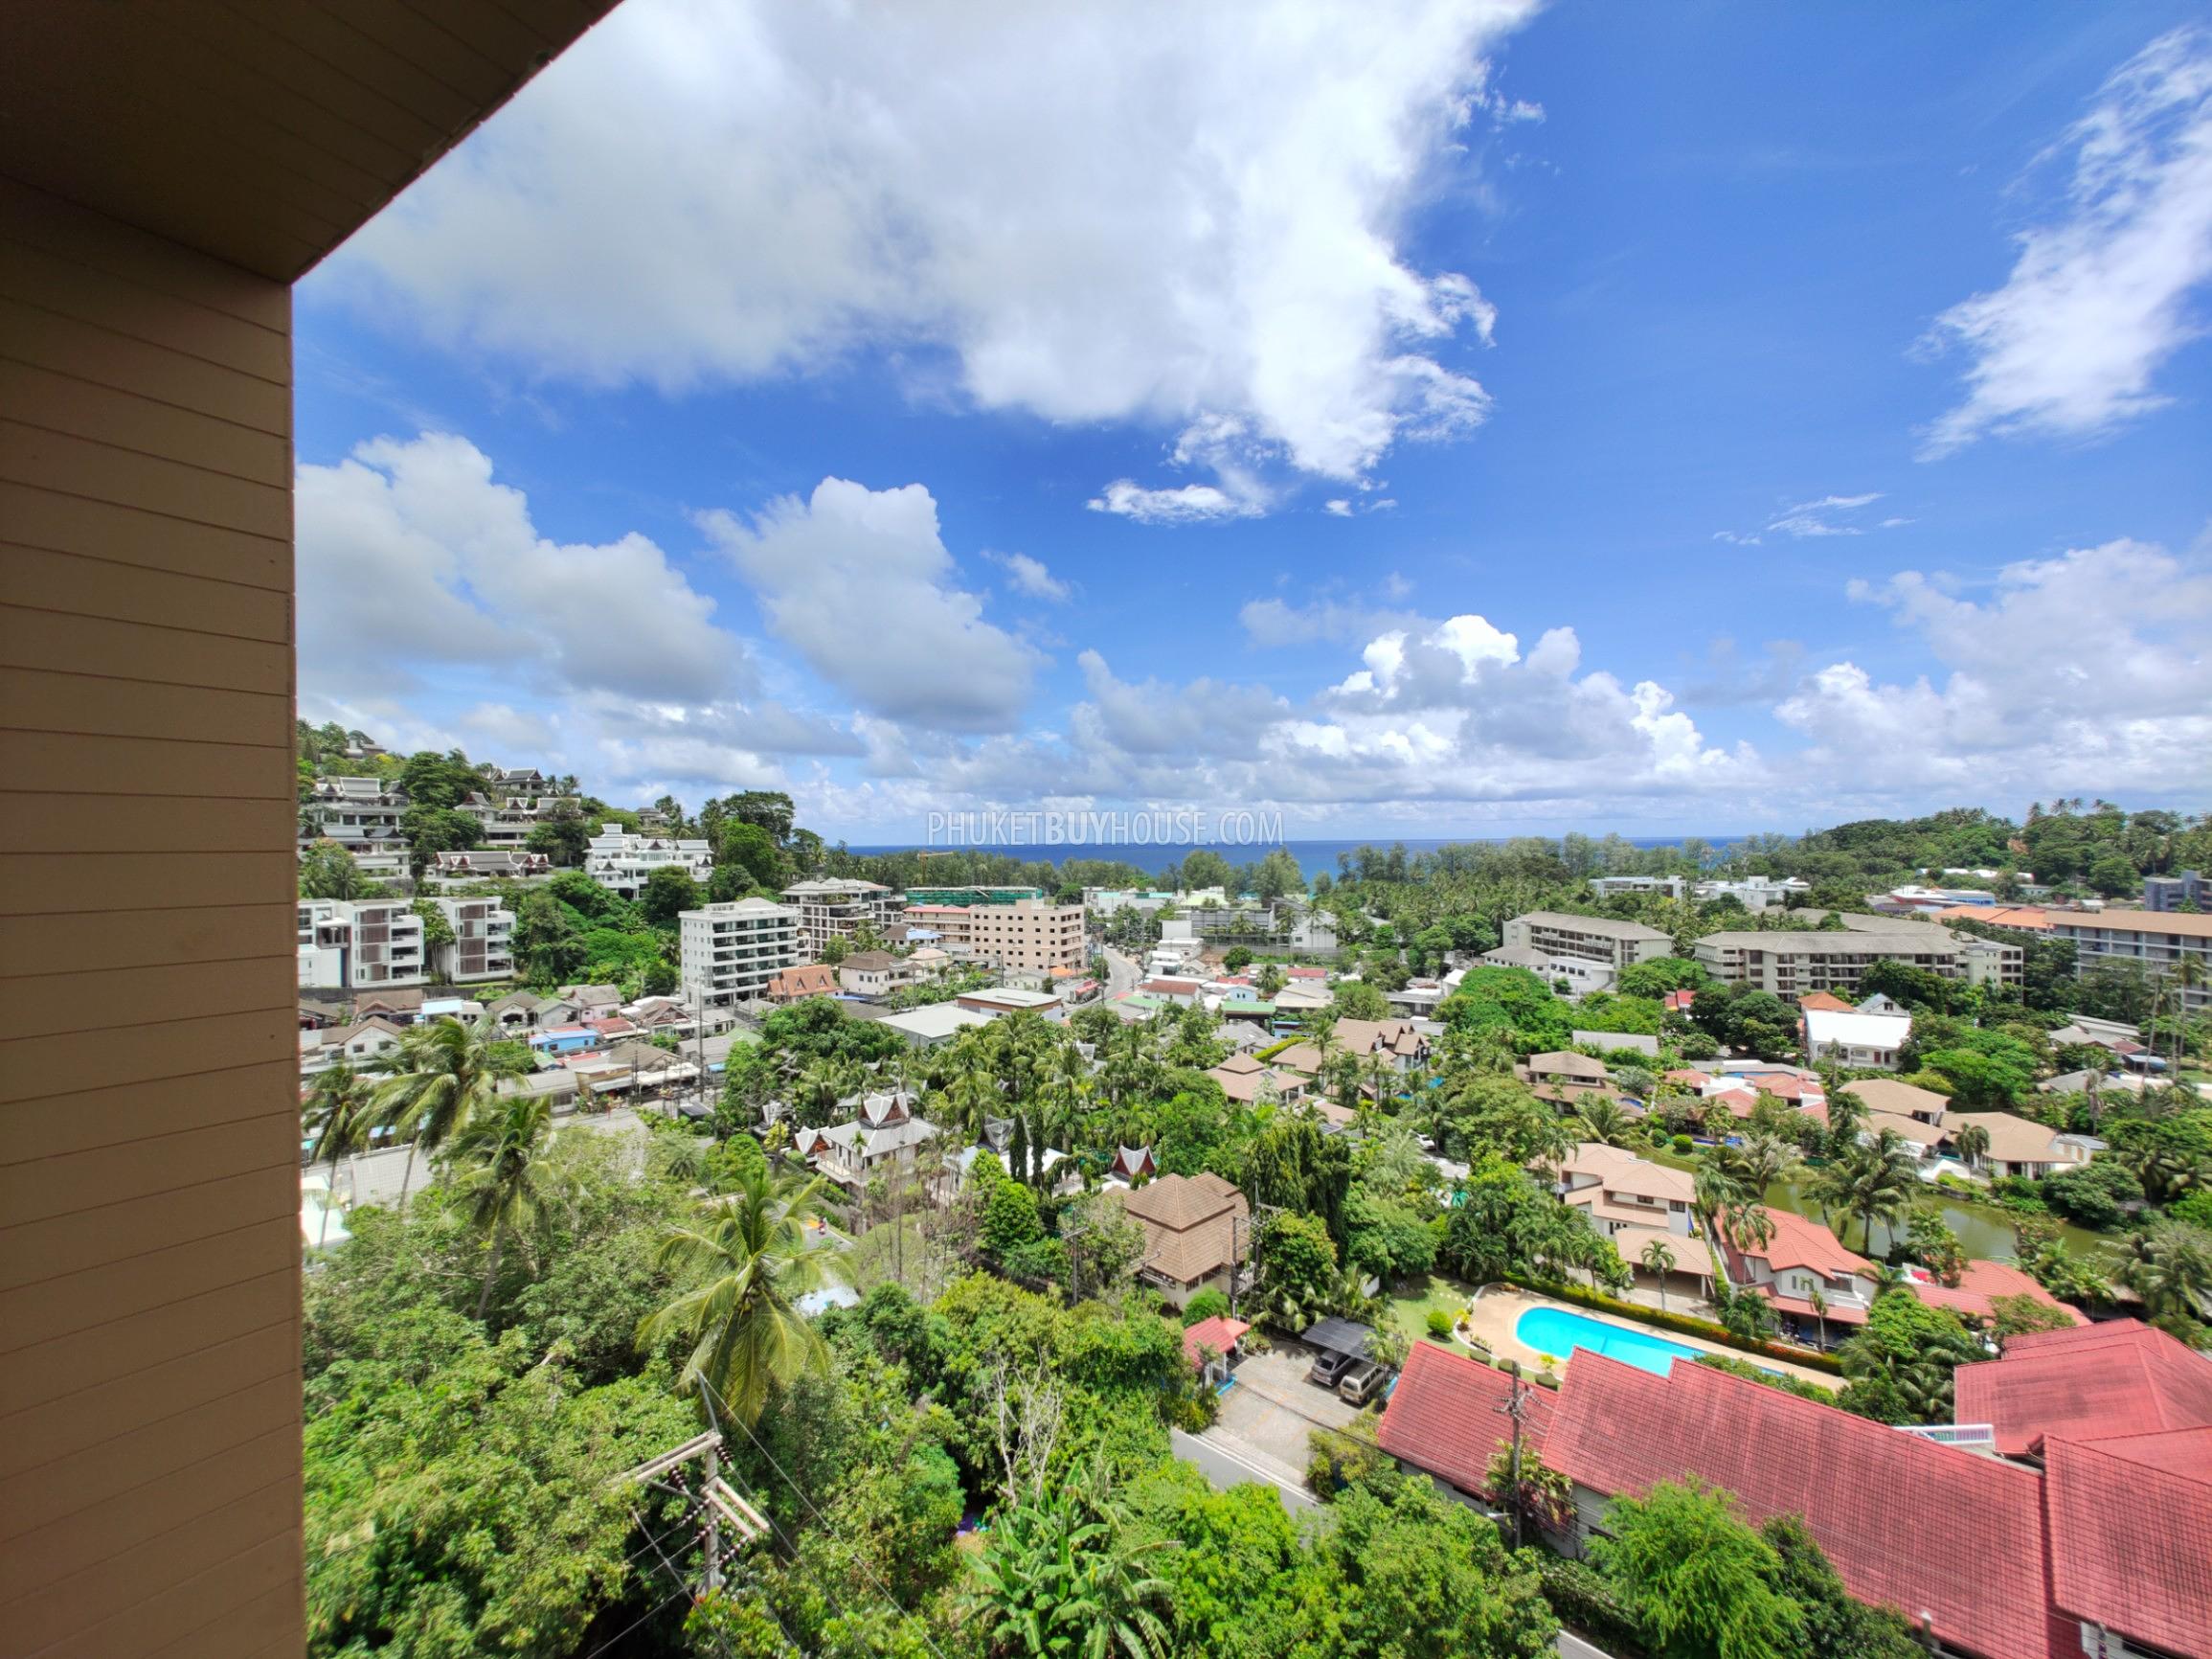 SUR22000: Irresistible Panoramic View from This Three Bedroom Apartment in Surin. Photo #37